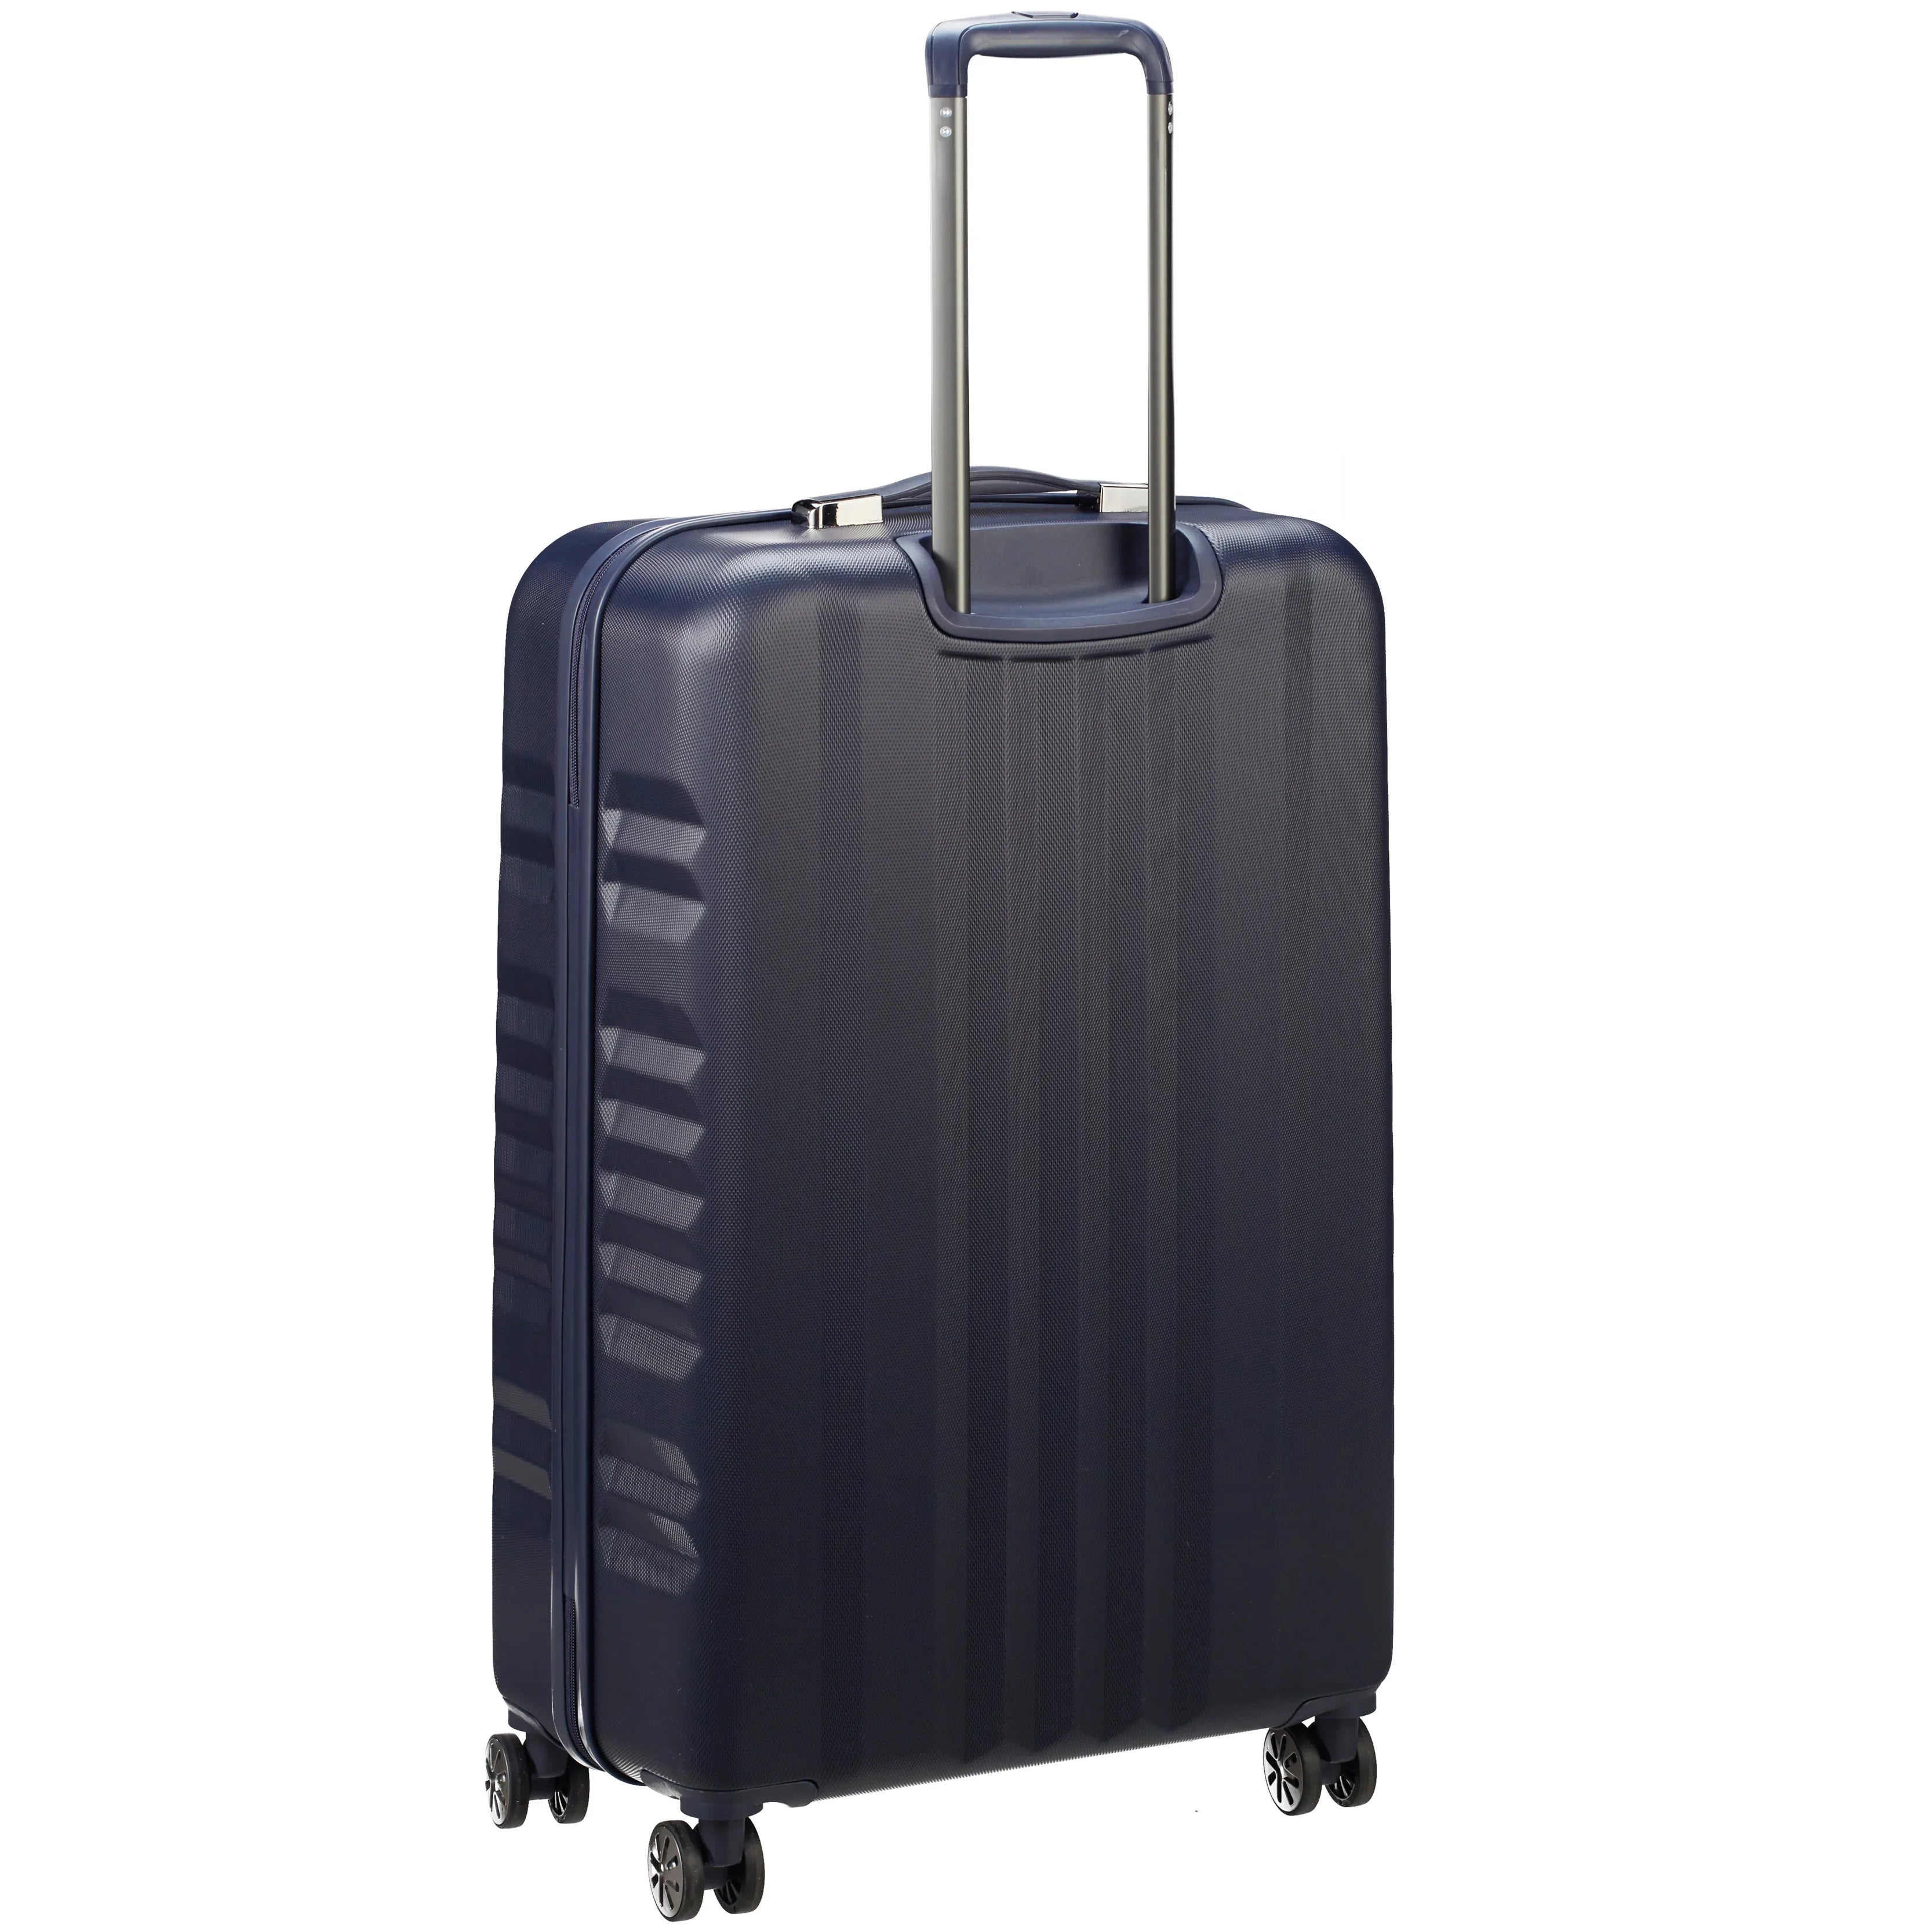 March 15 Trading Fly 4-Rollen Trolley 75 cm - silver brushed